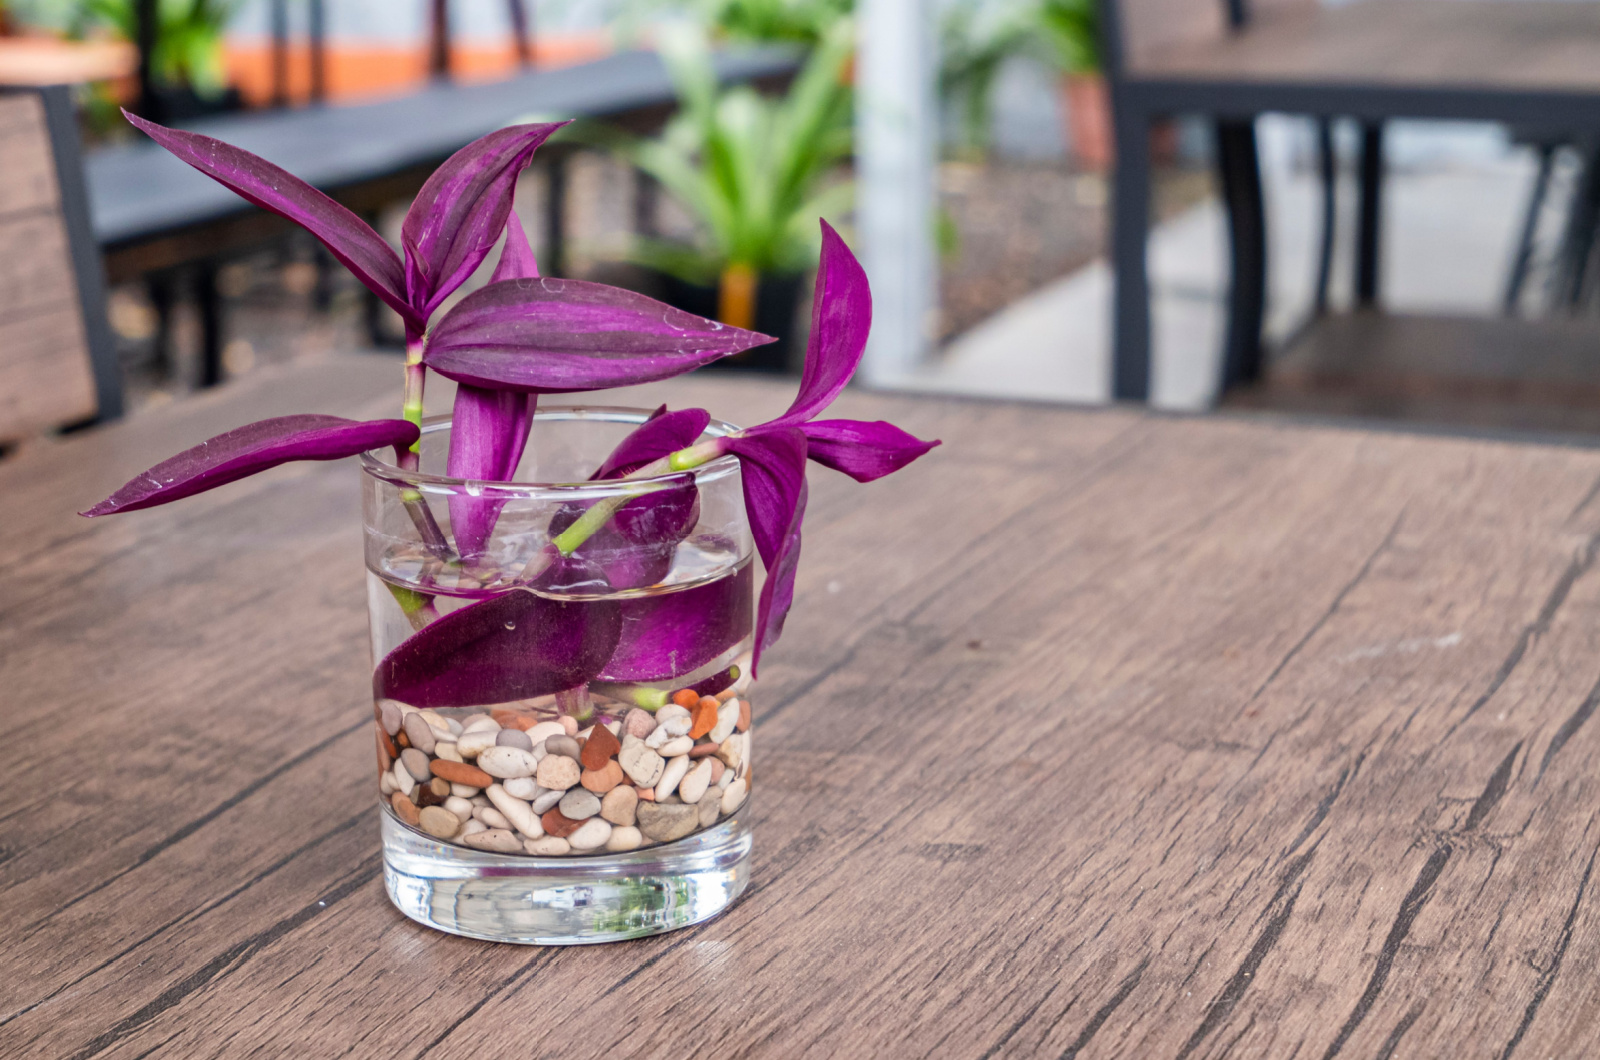 Wandering Jew Plant growing in a clear glass